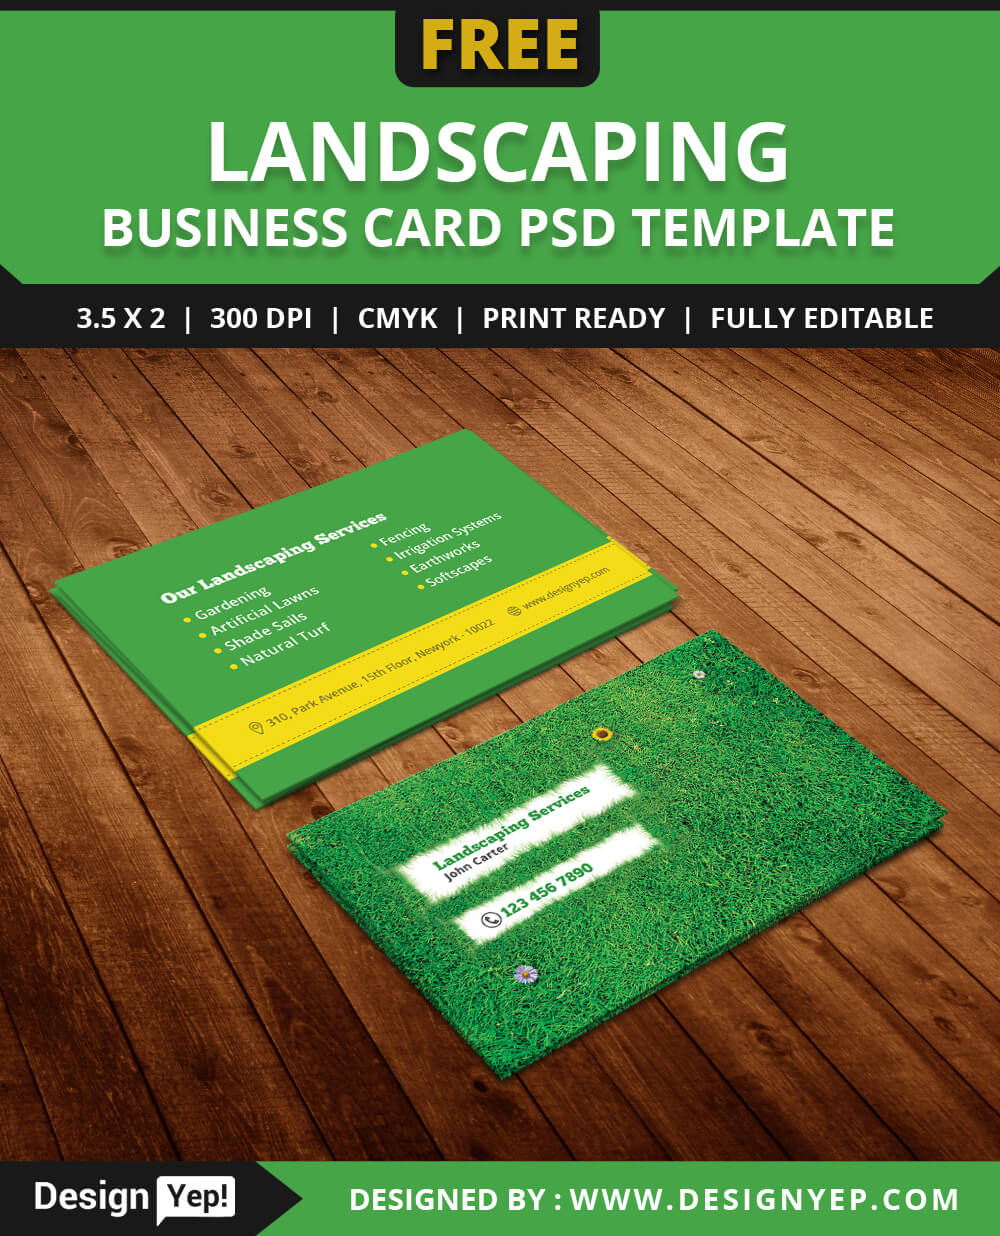 Free Landscaping Business Card Template Psd - Designyep Pertaining To Landscaping Business Card Template